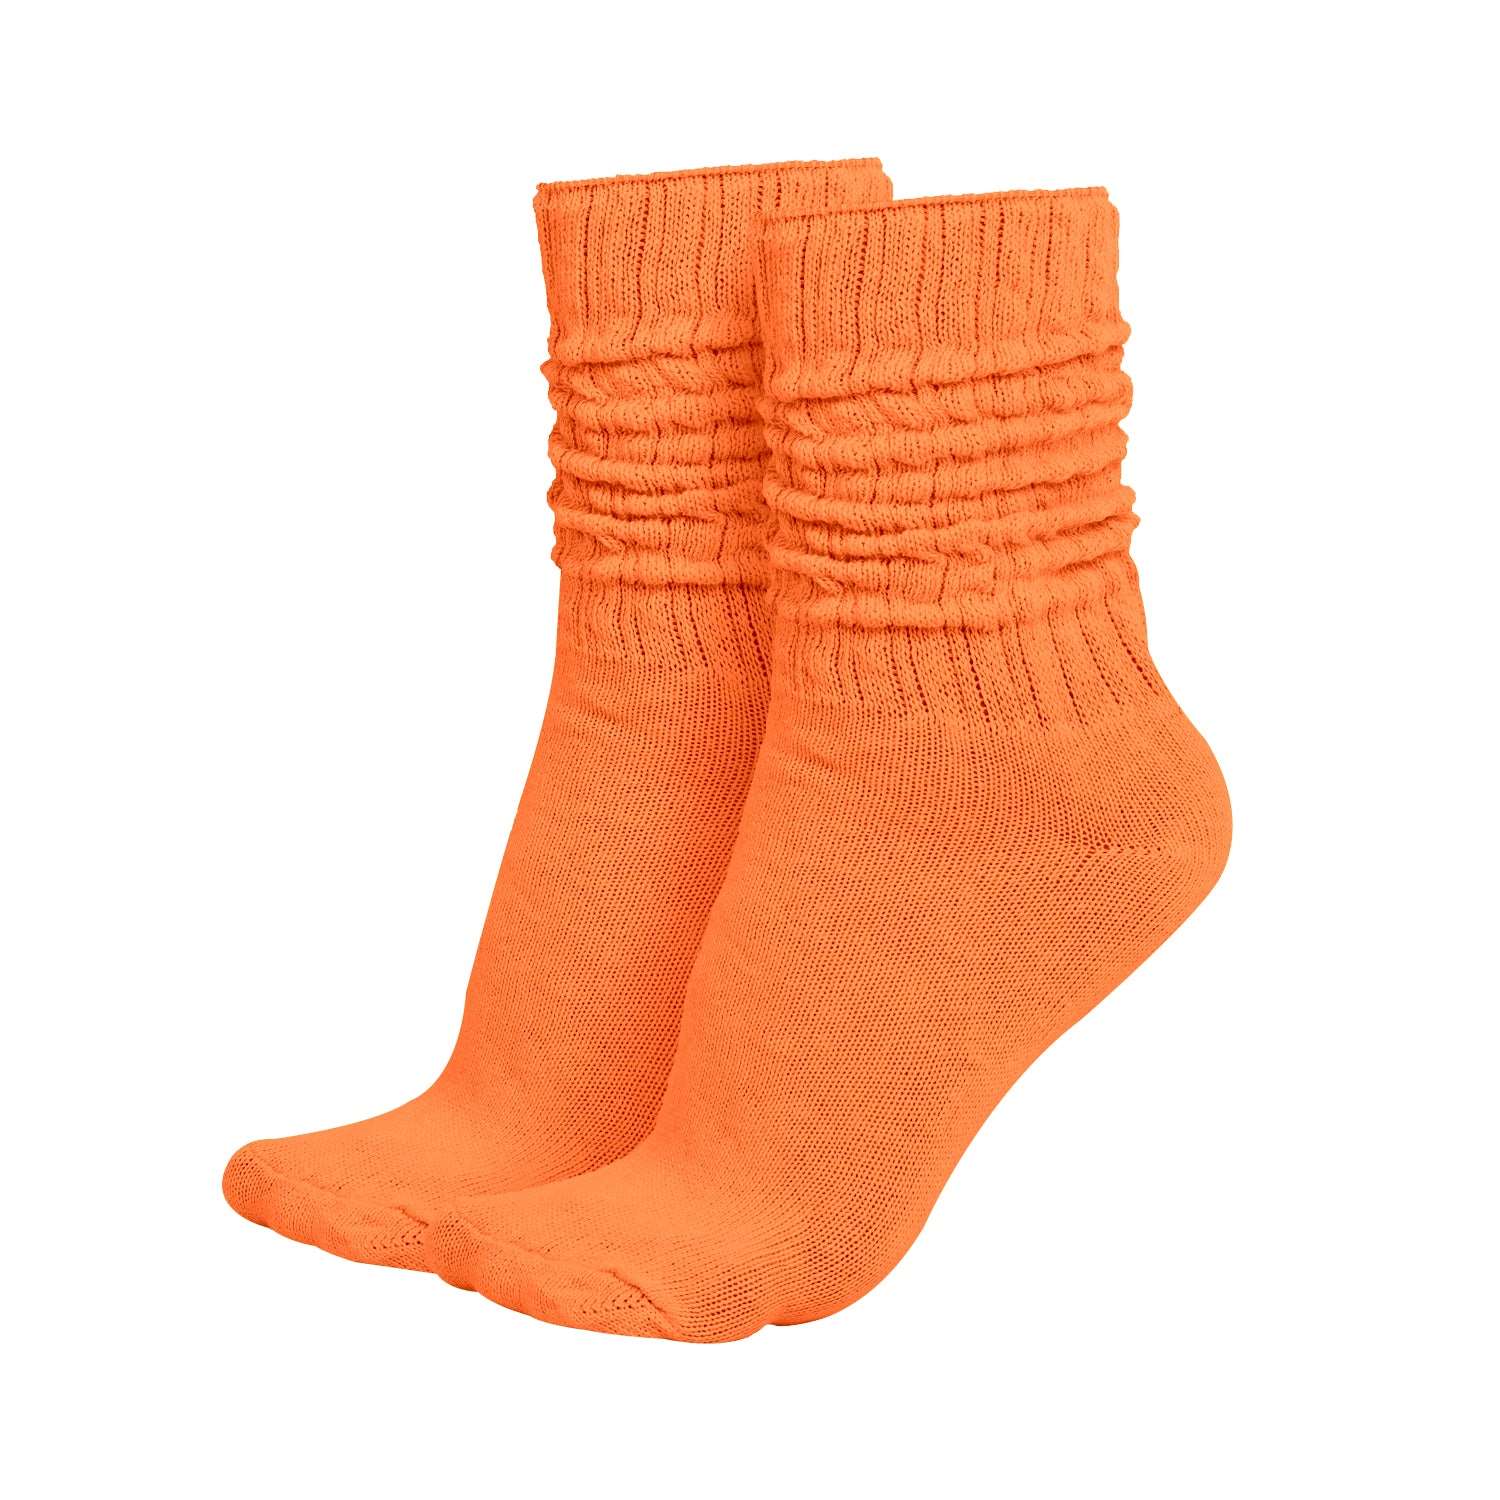 MDR Lightweight Cotton Slouch Socks For Women and Men 1 Pair Made in USA Size 9 to 11 (Orange)